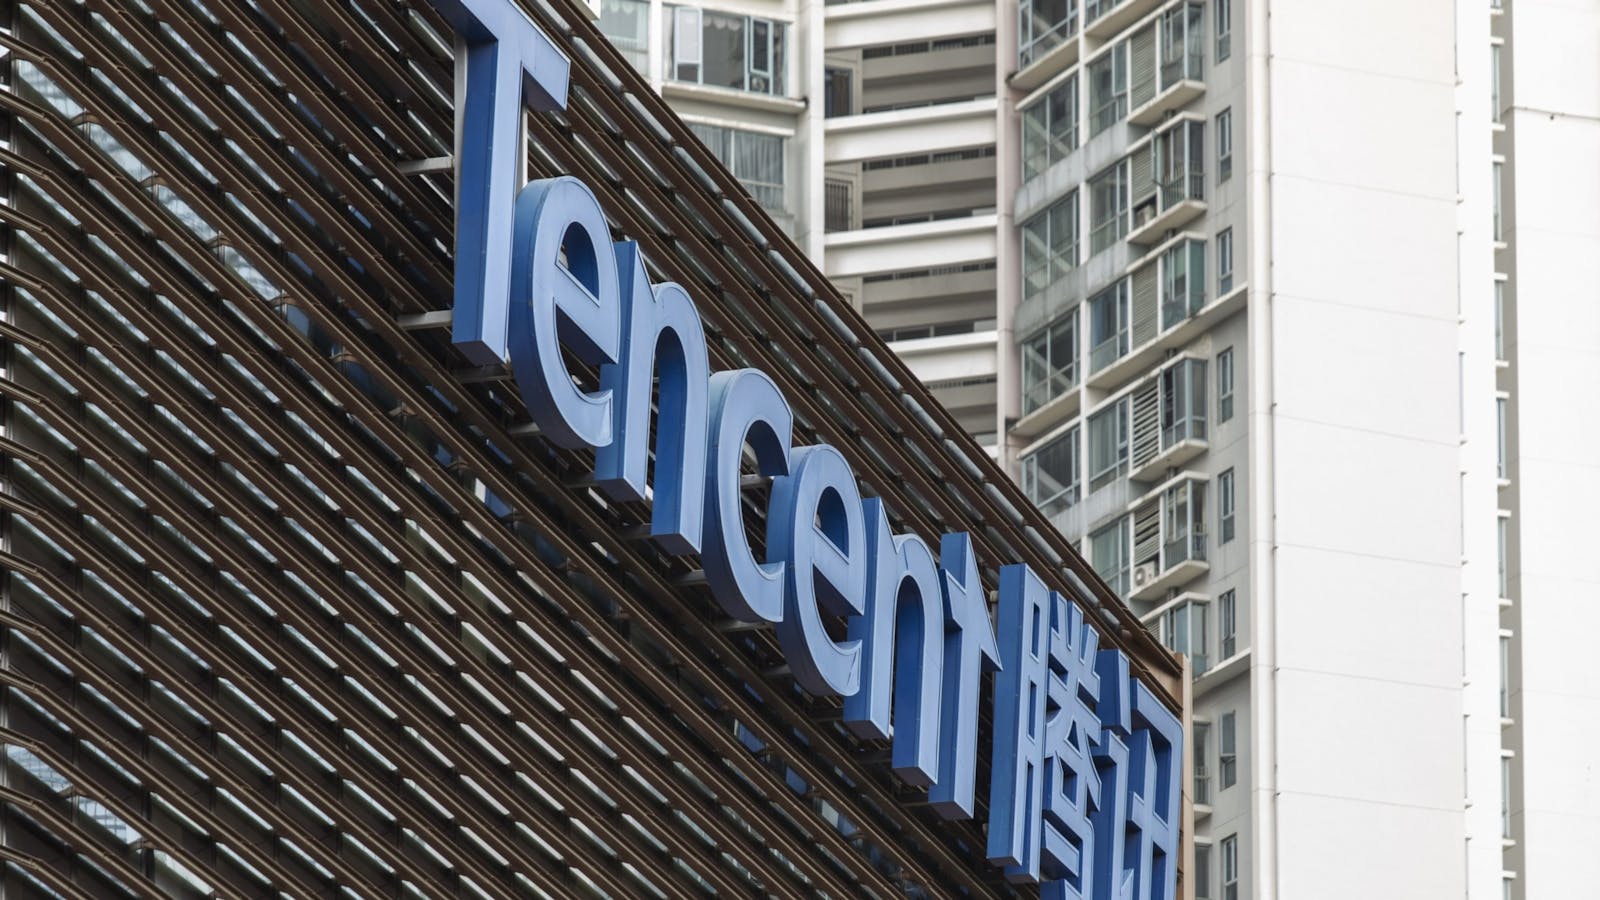 Tencent's headquarters in Shenzhen, China. Photo by Bloomberg.